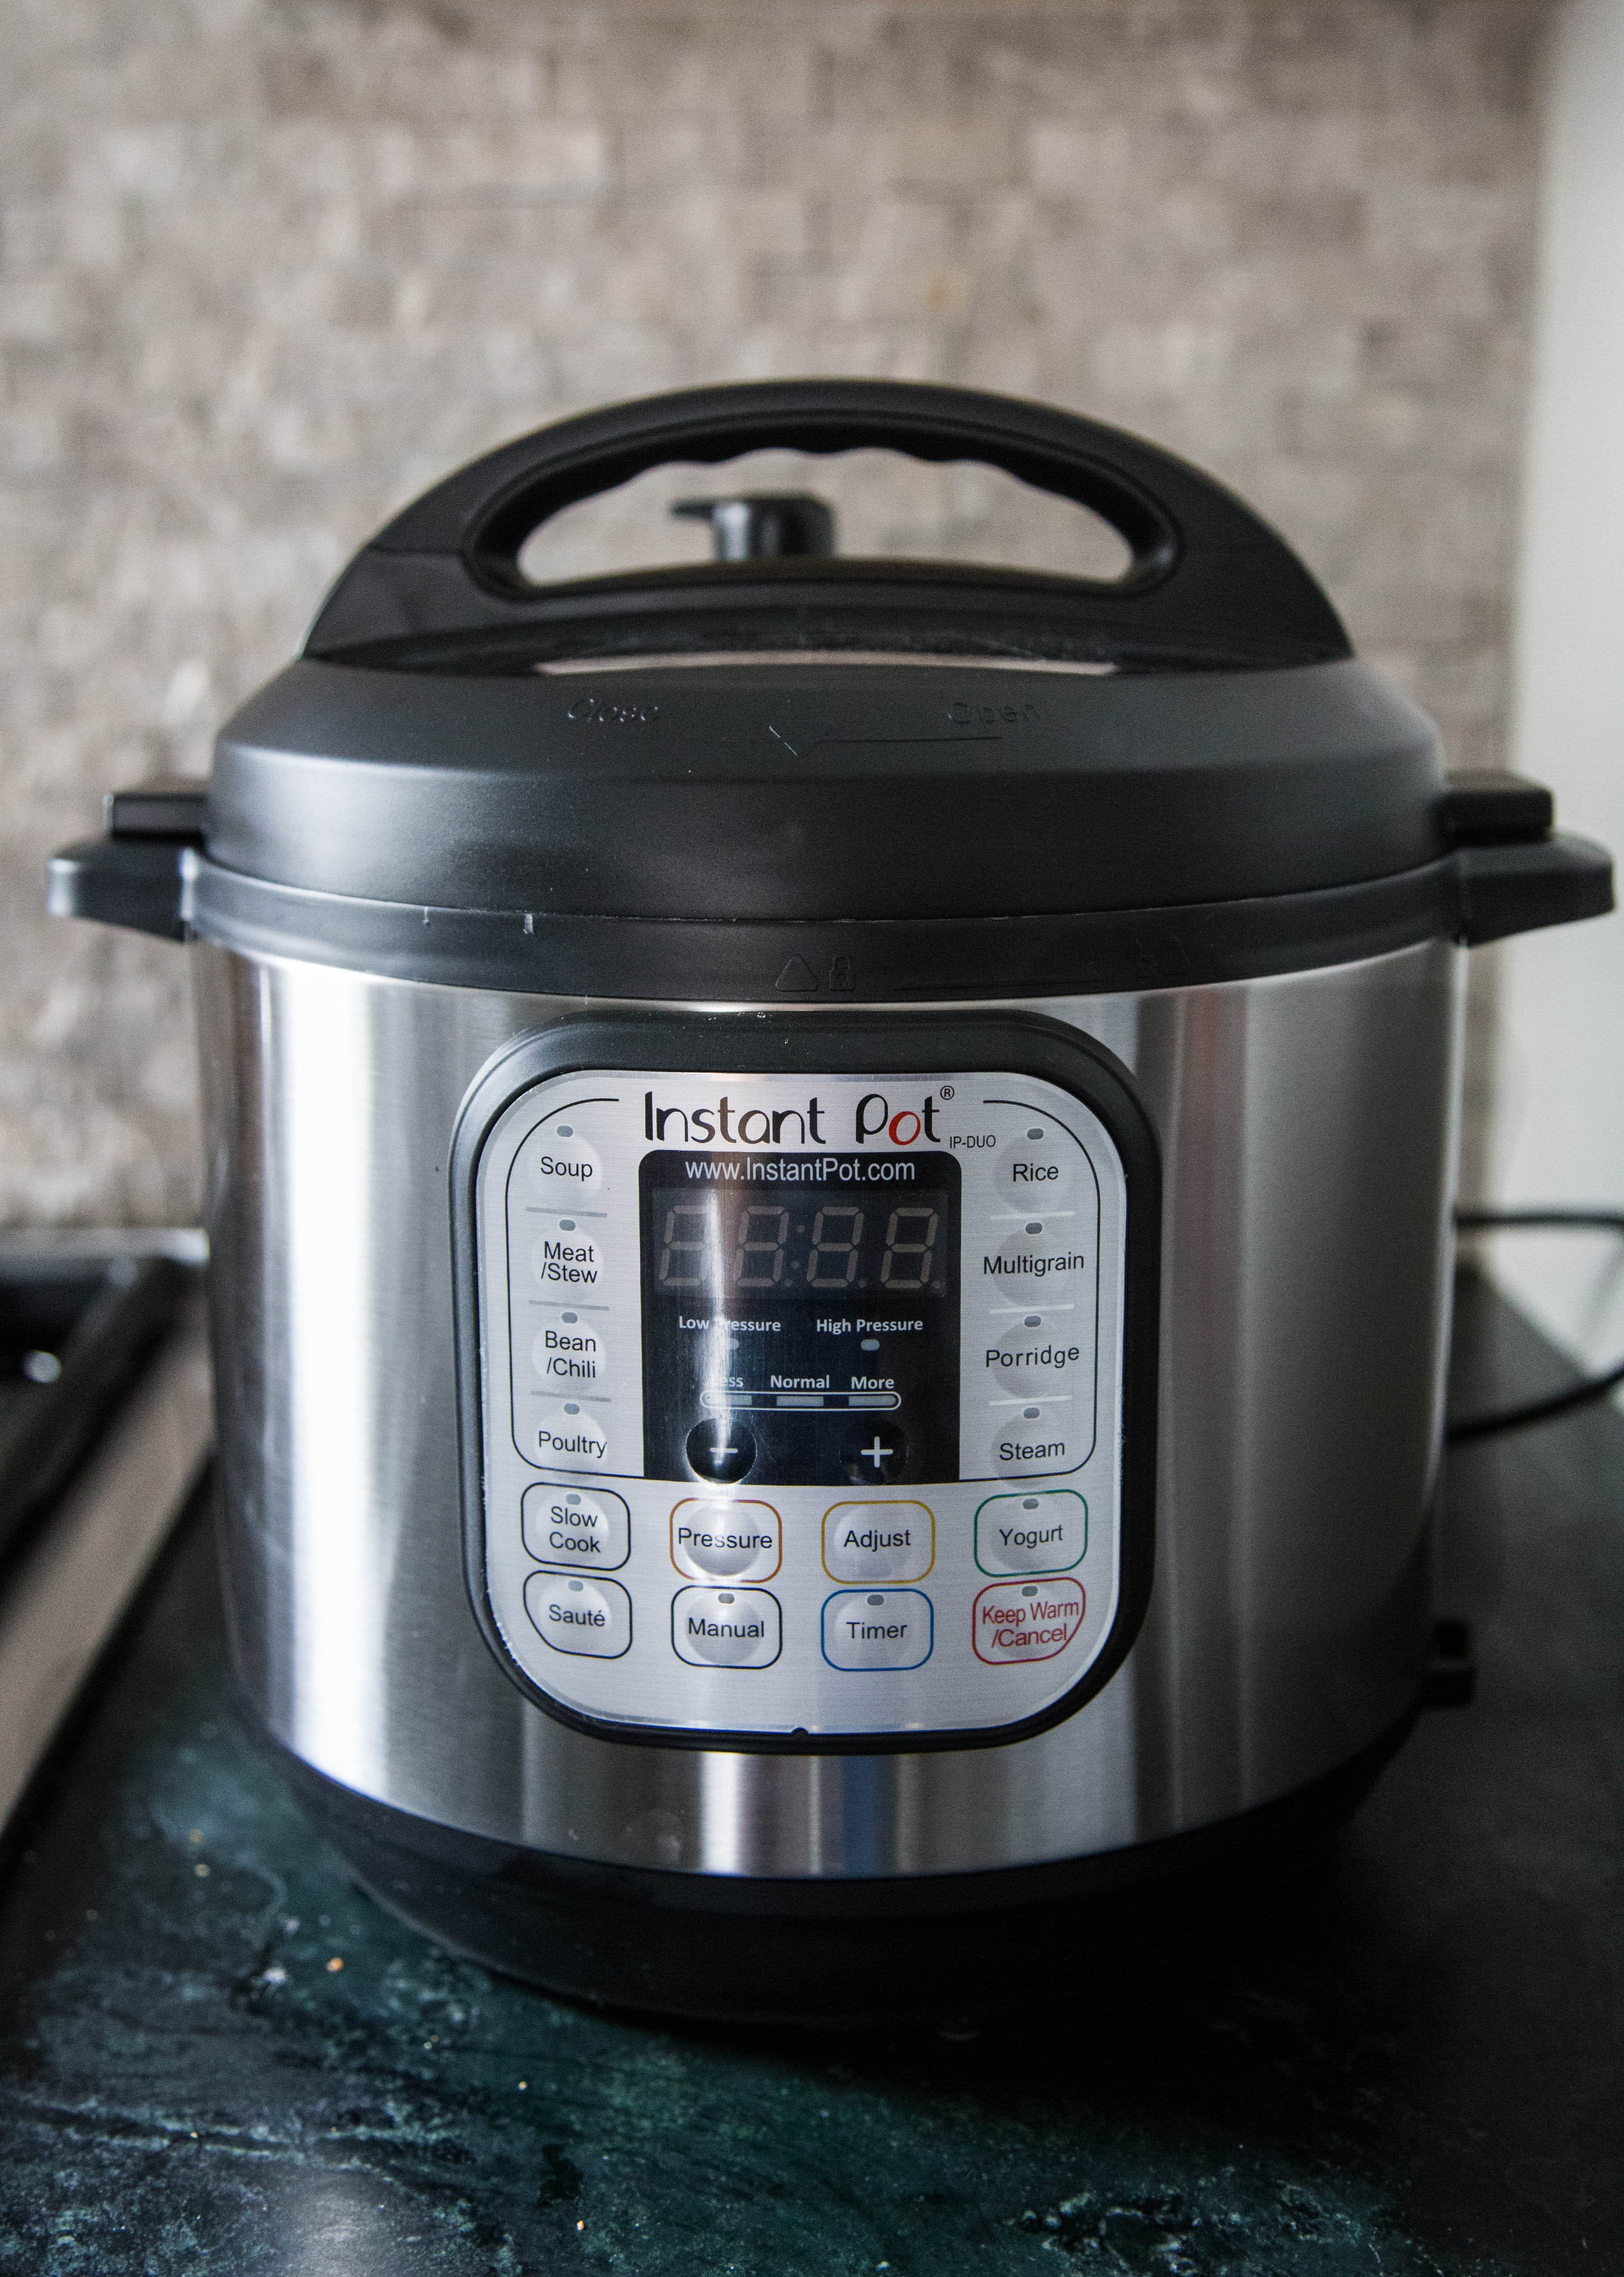 The Instant Pot Is One Machine That Does the Work of 7 Gadgets